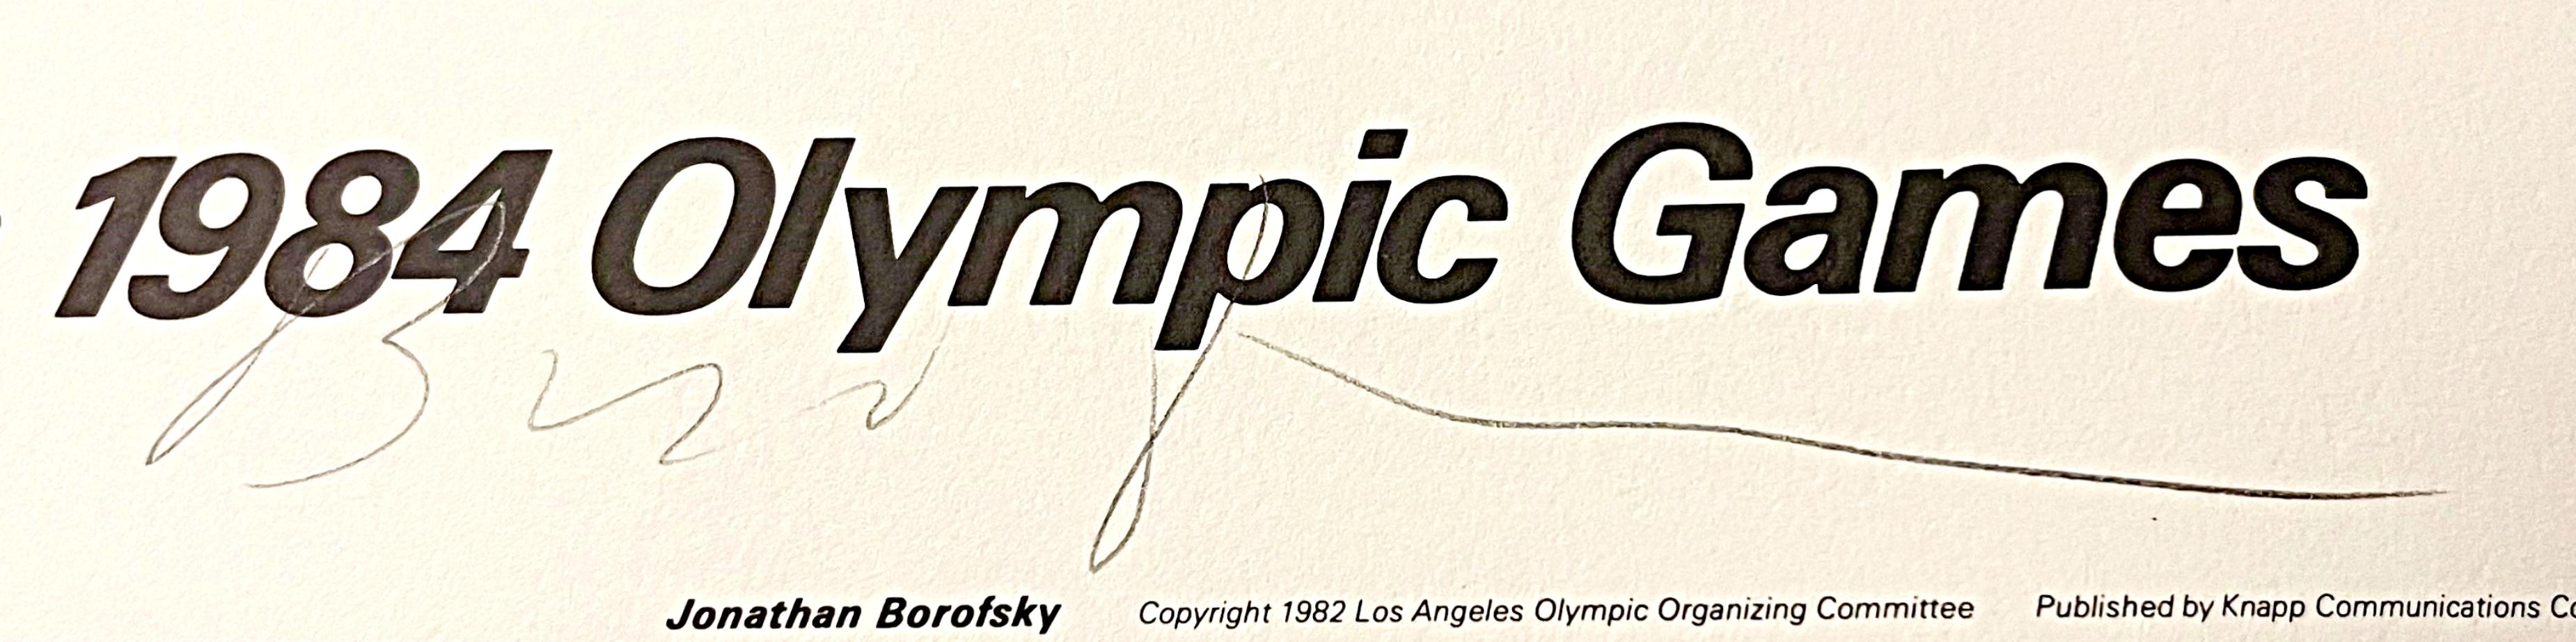 Los Angeles 1984 Olympic Games (Hand Signed with Olympic Committee COA) - Contemporary Print by Jonathan Borofsky